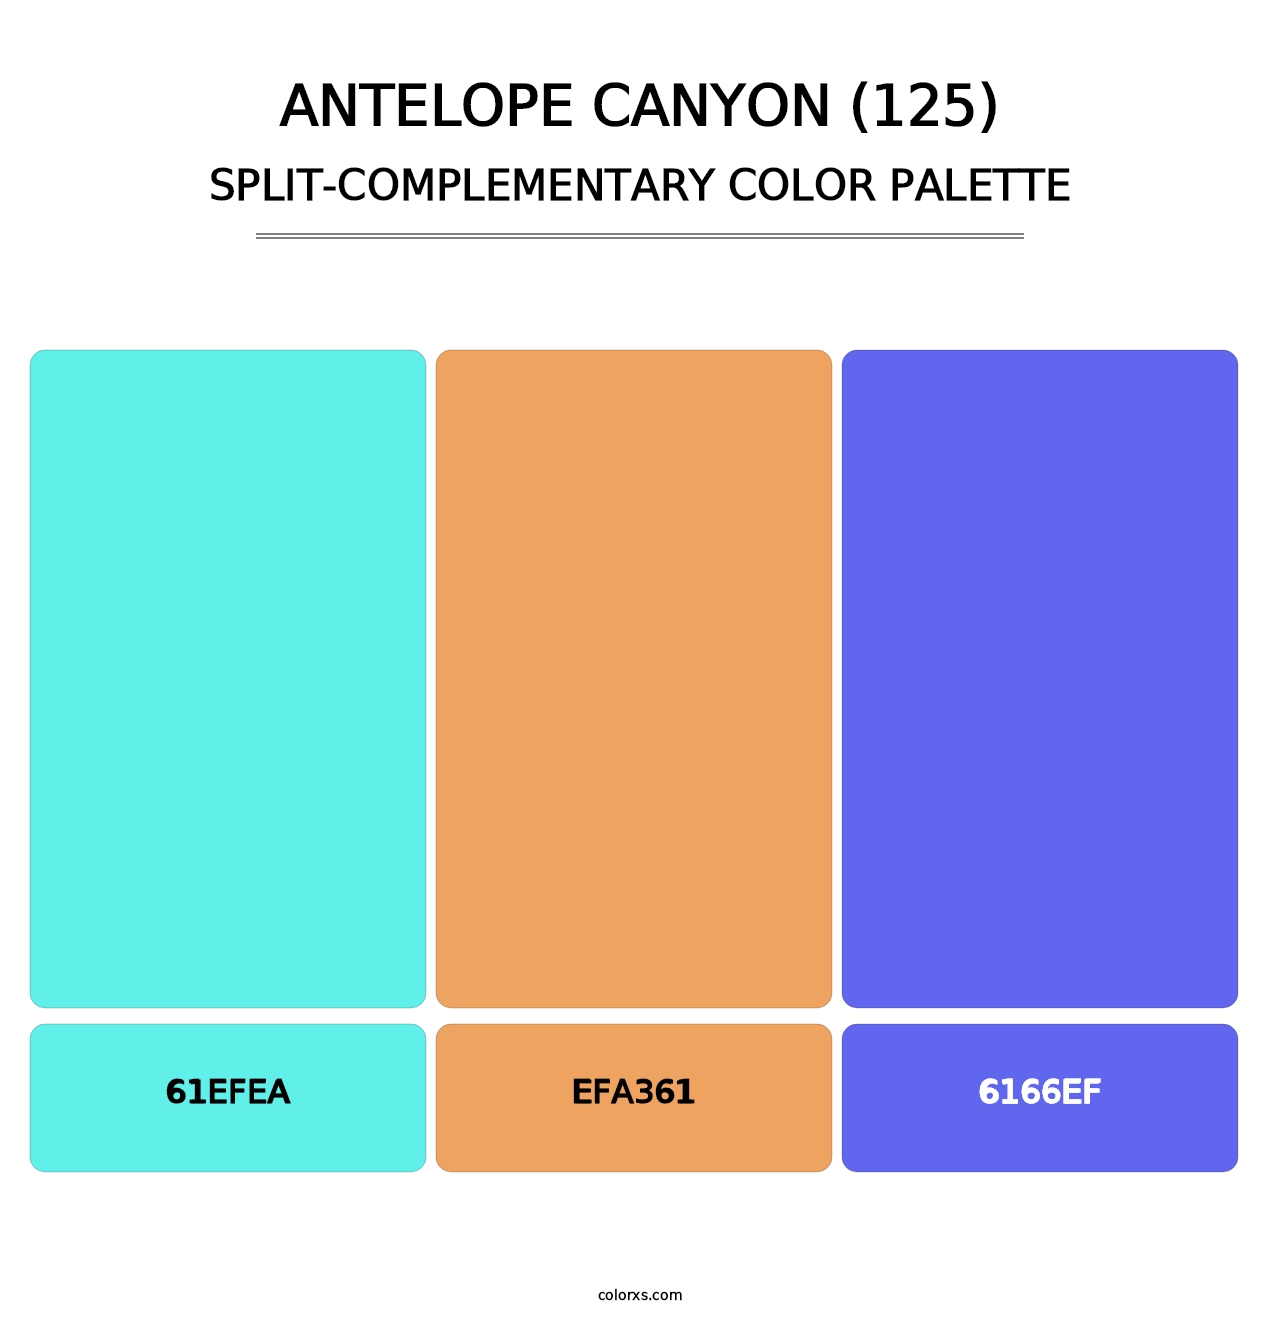 Antelope Canyon (125) - Split-Complementary Color Palette